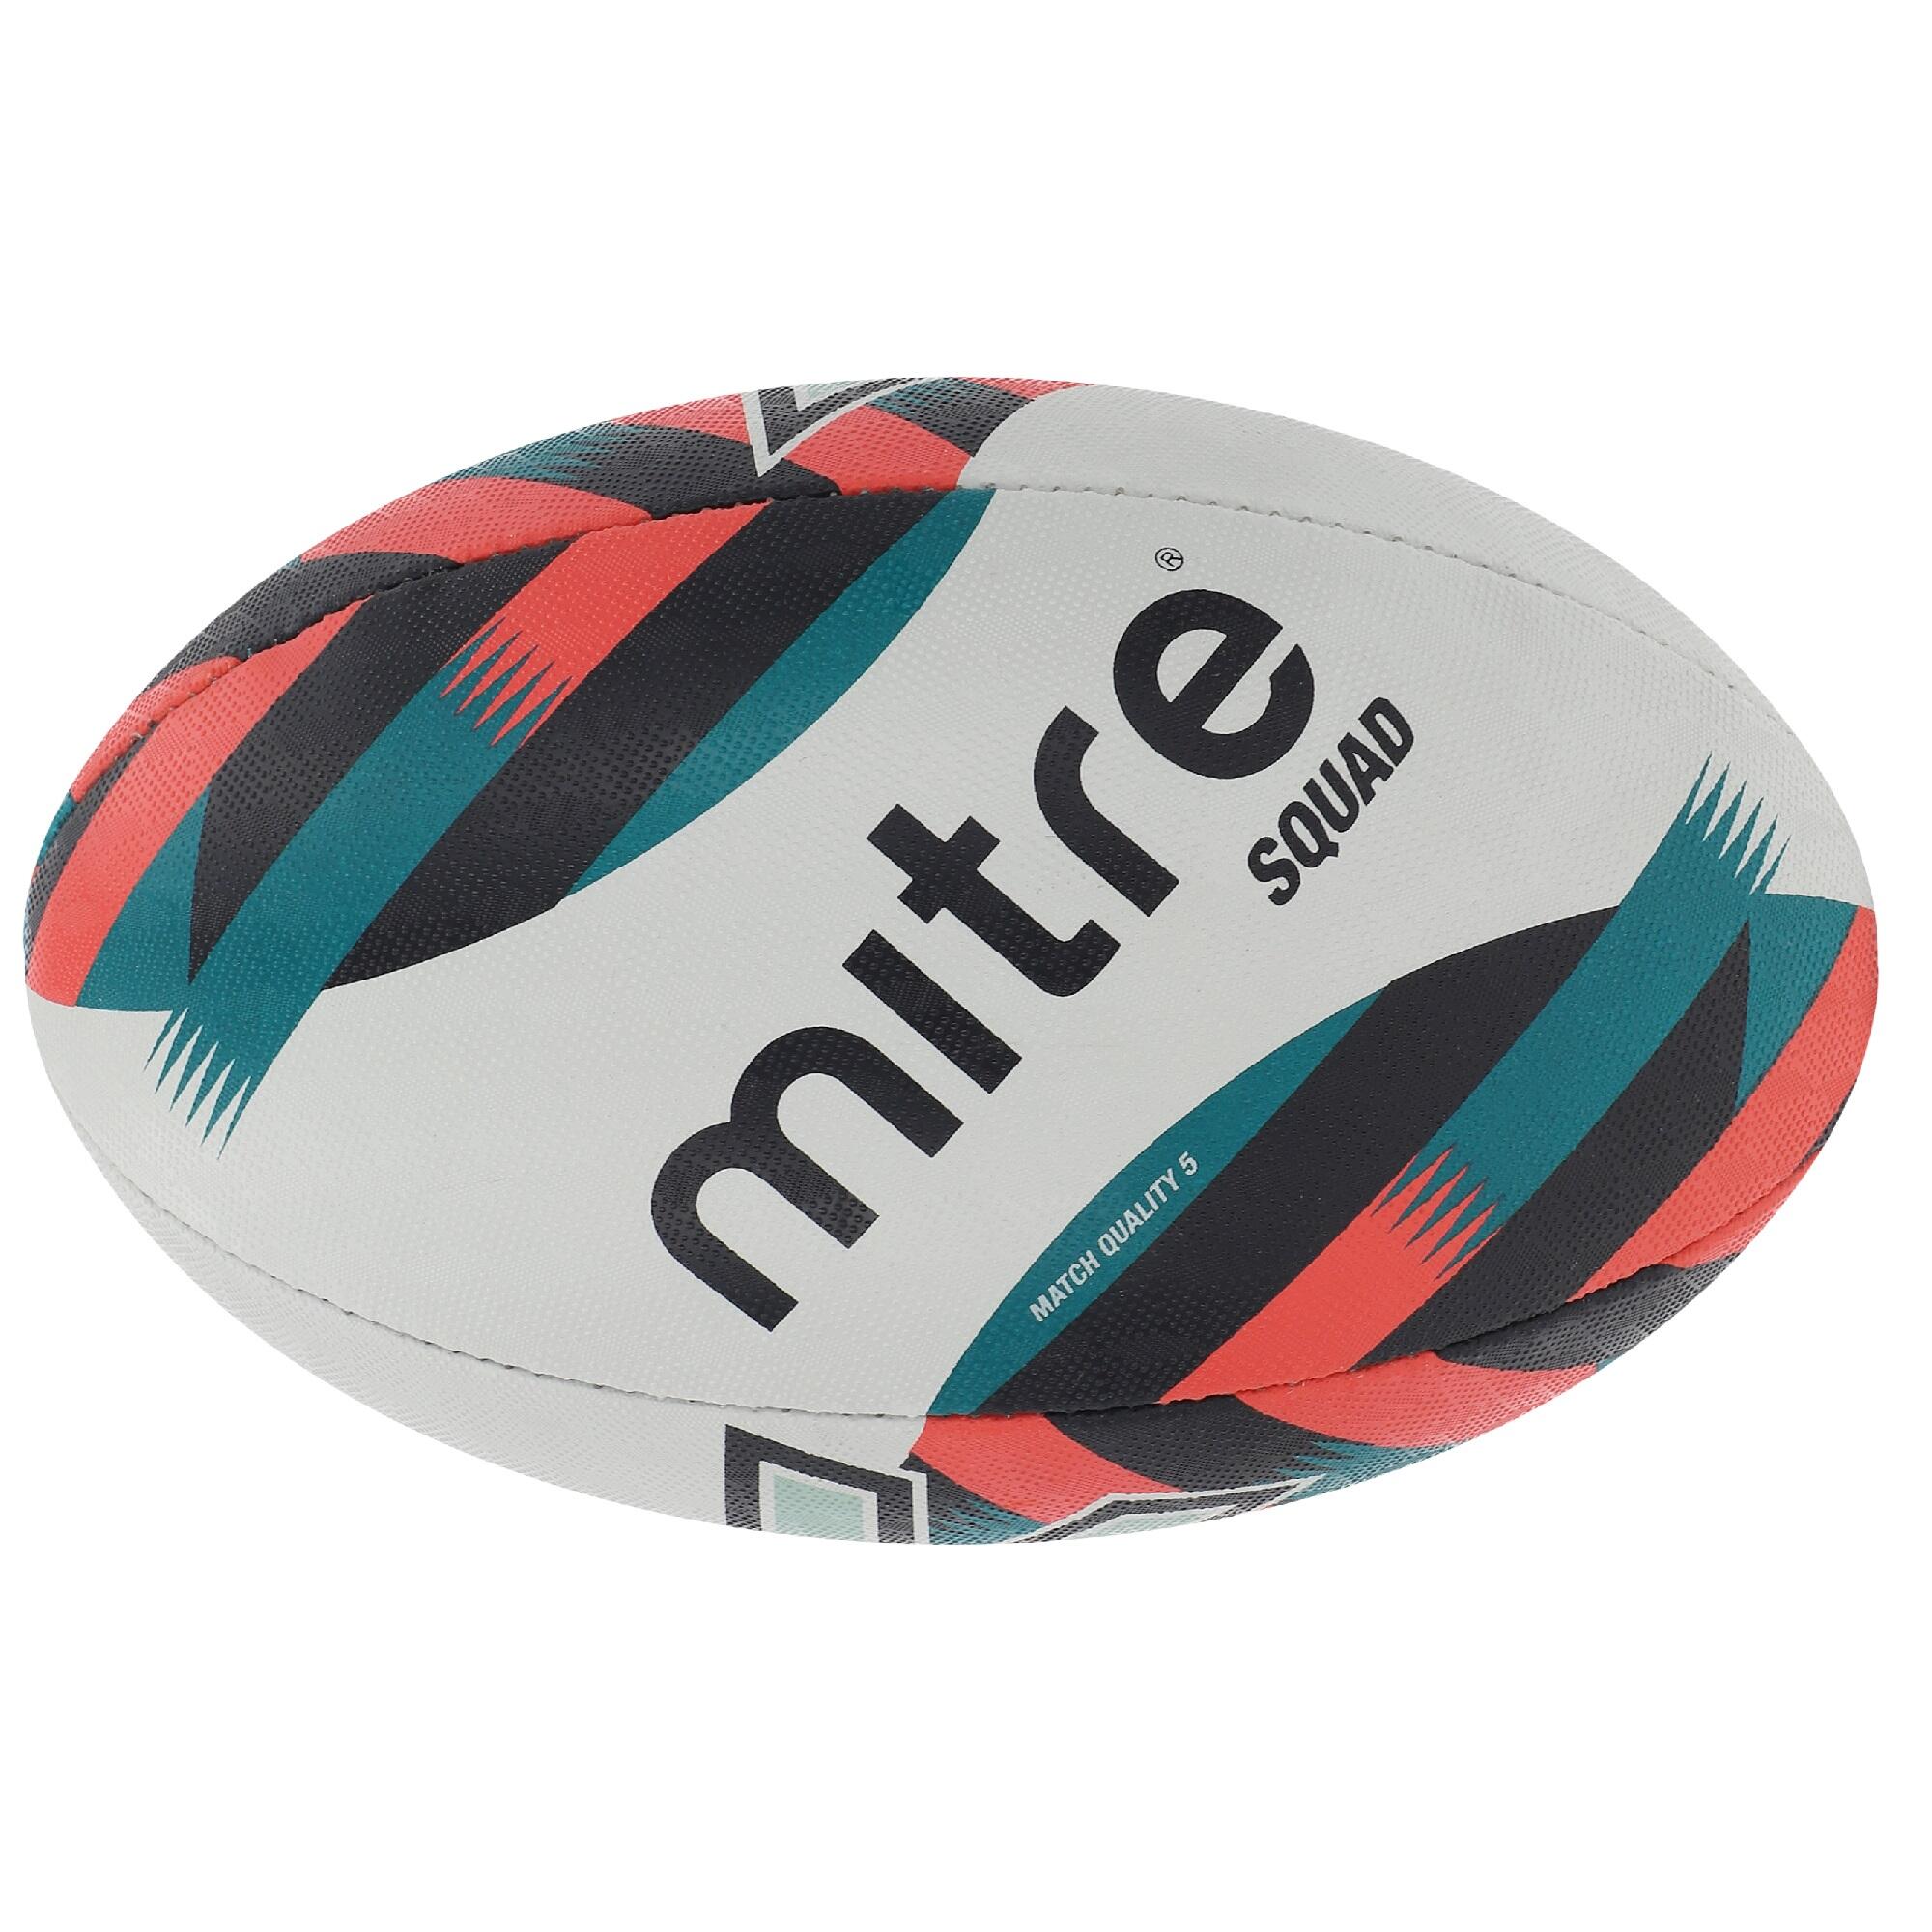 MITRE Squad Rugby Ball (White/Red/Blue)